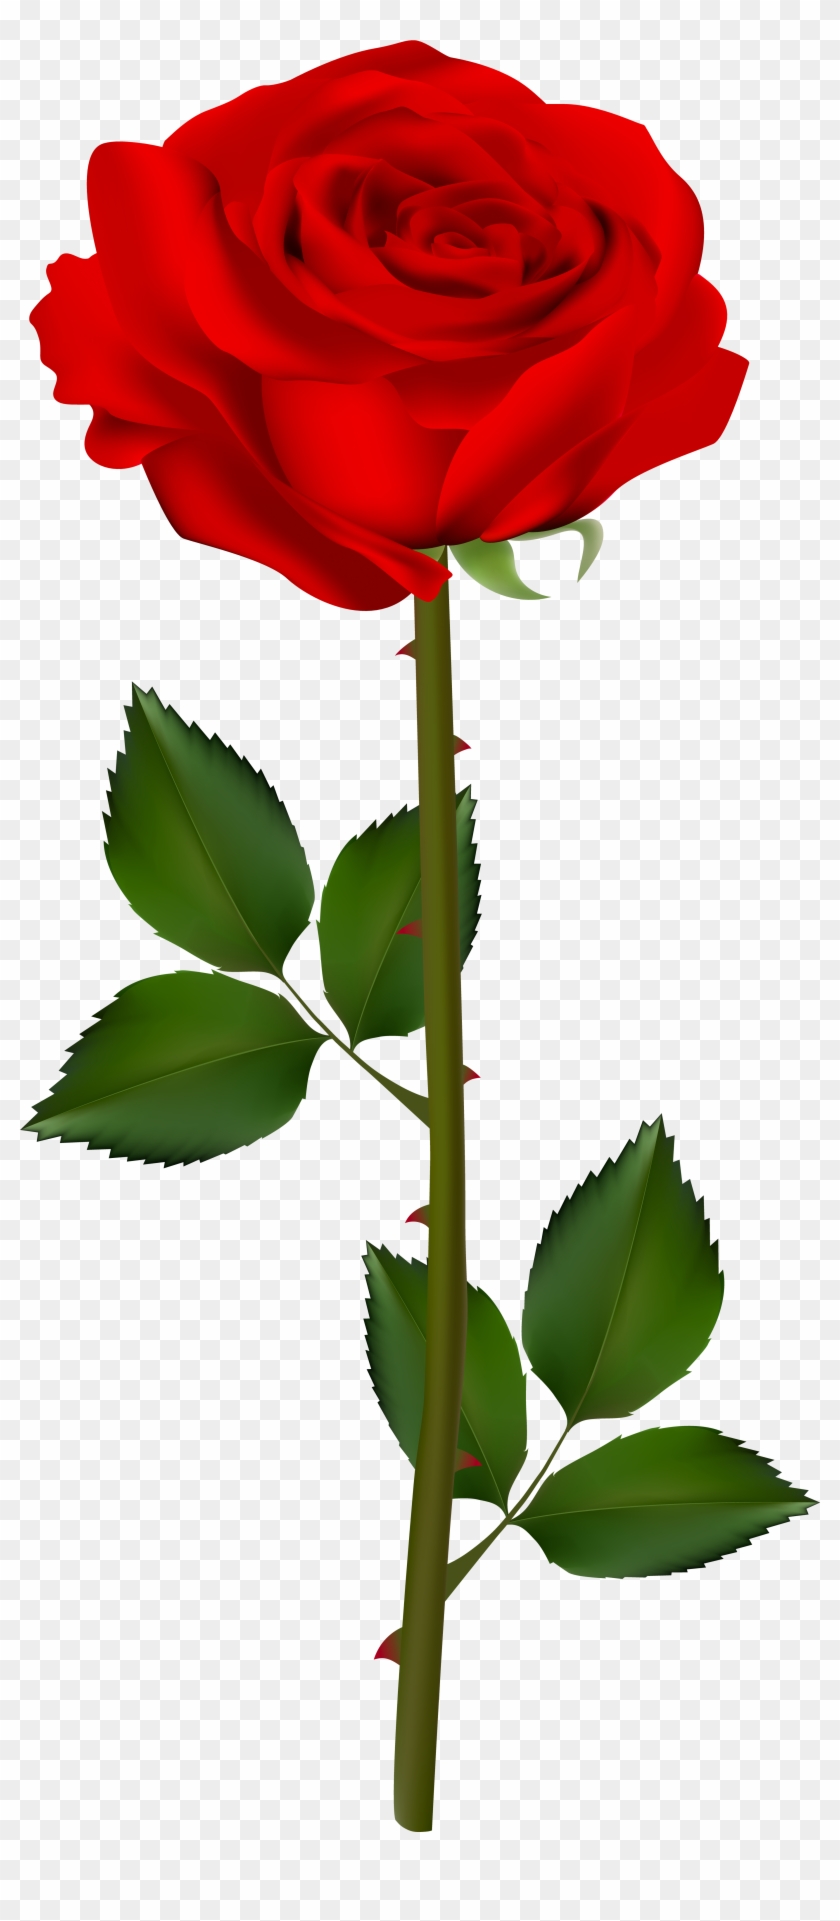 Jpg Black And White Download Gardener Clipart Old - Red Rose With Transparent Background - Png Download #5065564